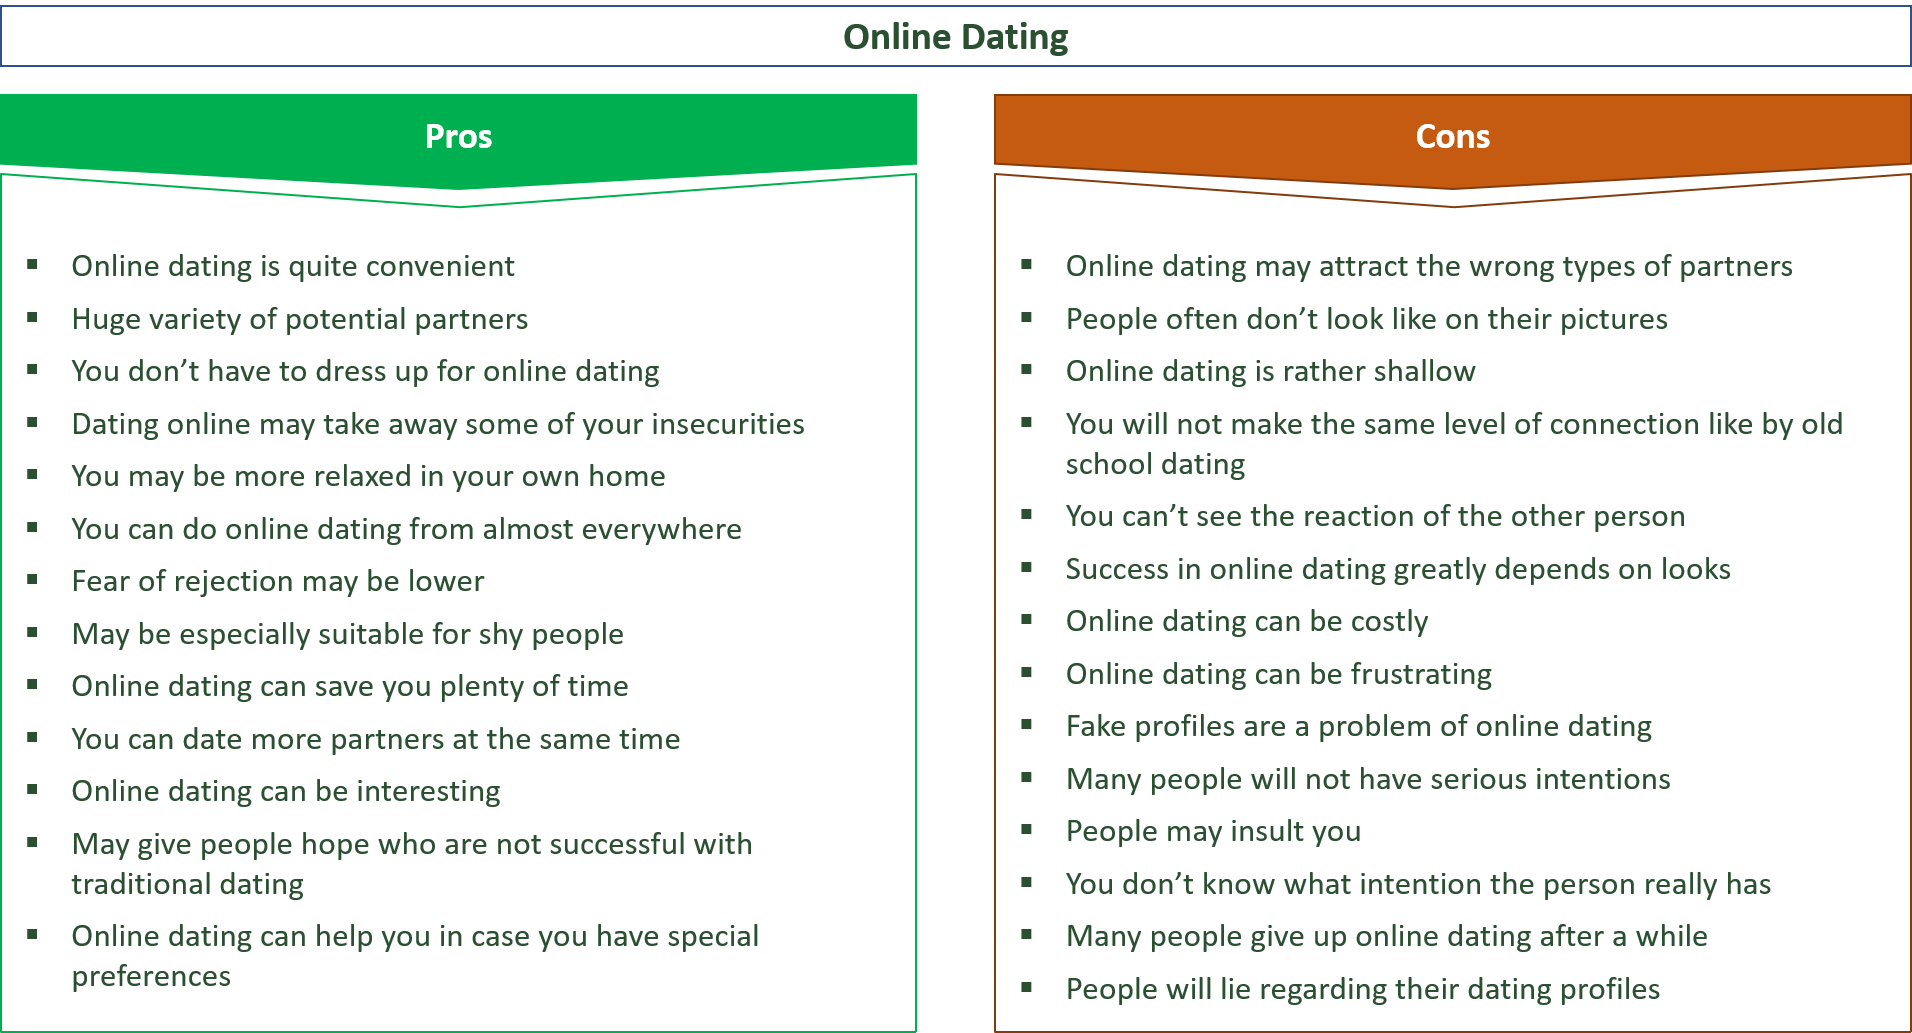 online dating pros and cons